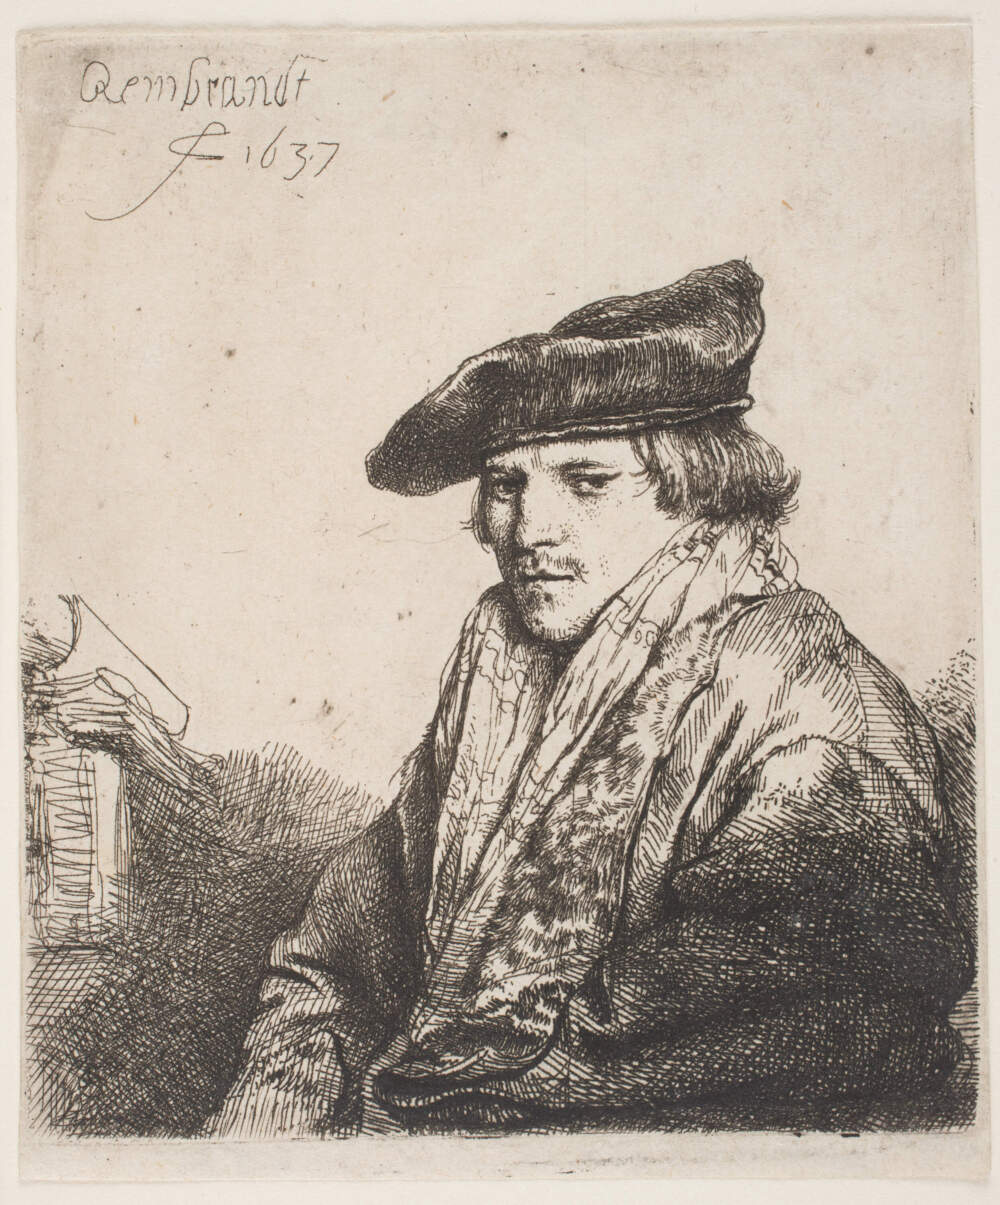 Rembrandt van Rijn, &quot;A Young Man In A Velvet Cap,&quot; 1637, etching on cream laid paper. From Mrs. Kingsmill Marrs Collection. (Courtesy Museum Boijmans Van Beuningen, Rotterdam and Worcester Art Museum)